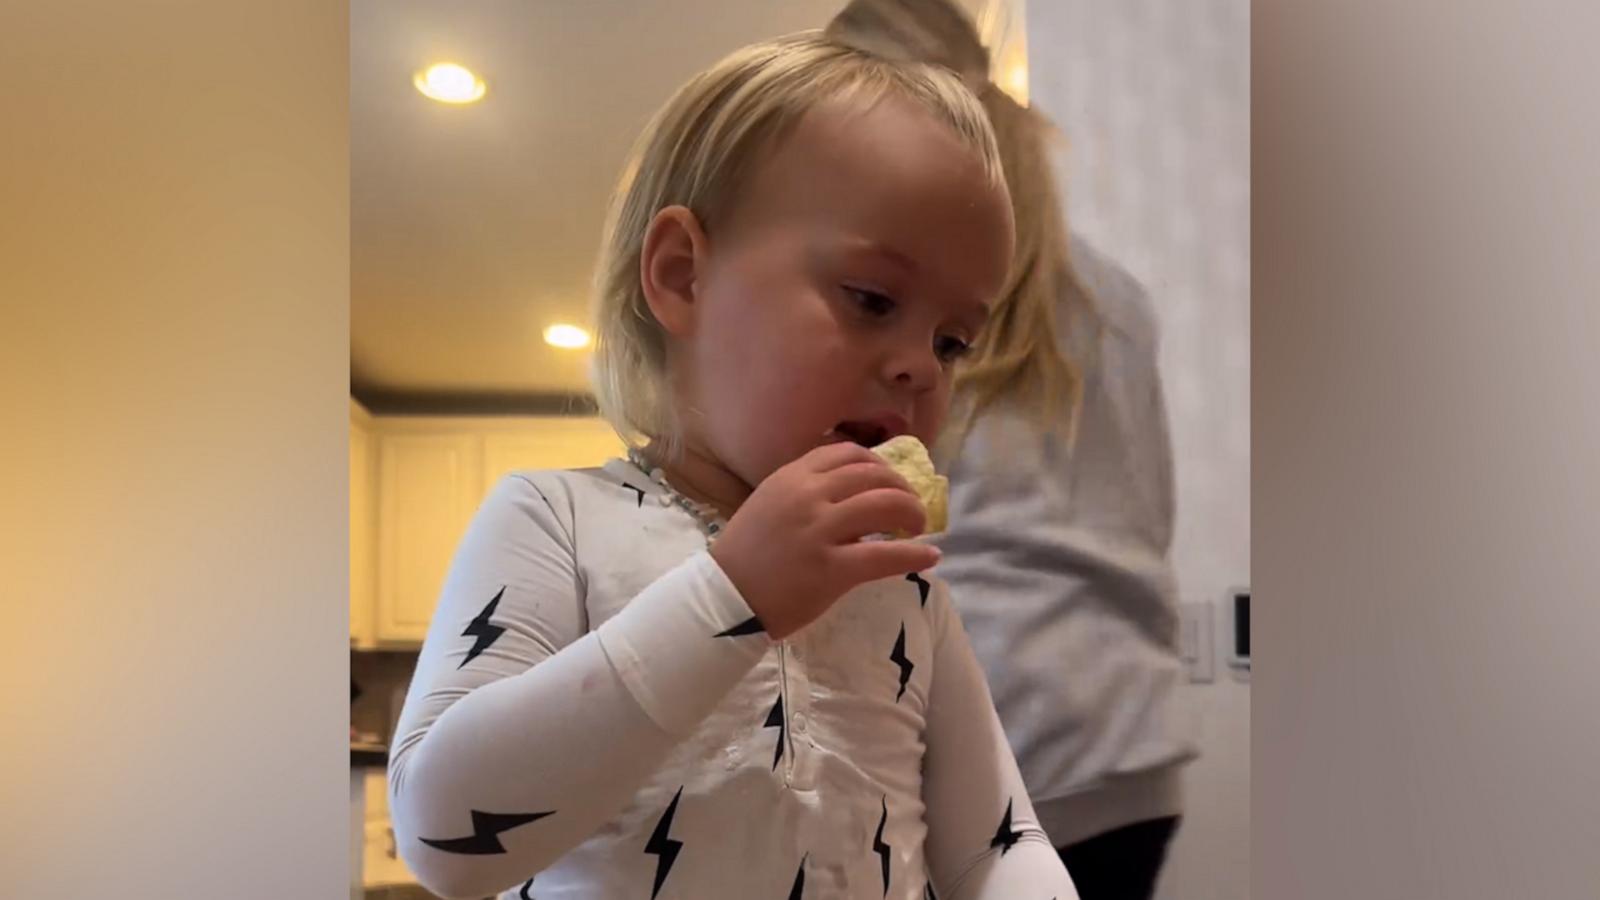 VIDEO: Toddler eating potato chips experiences pure, unfiltered bliss